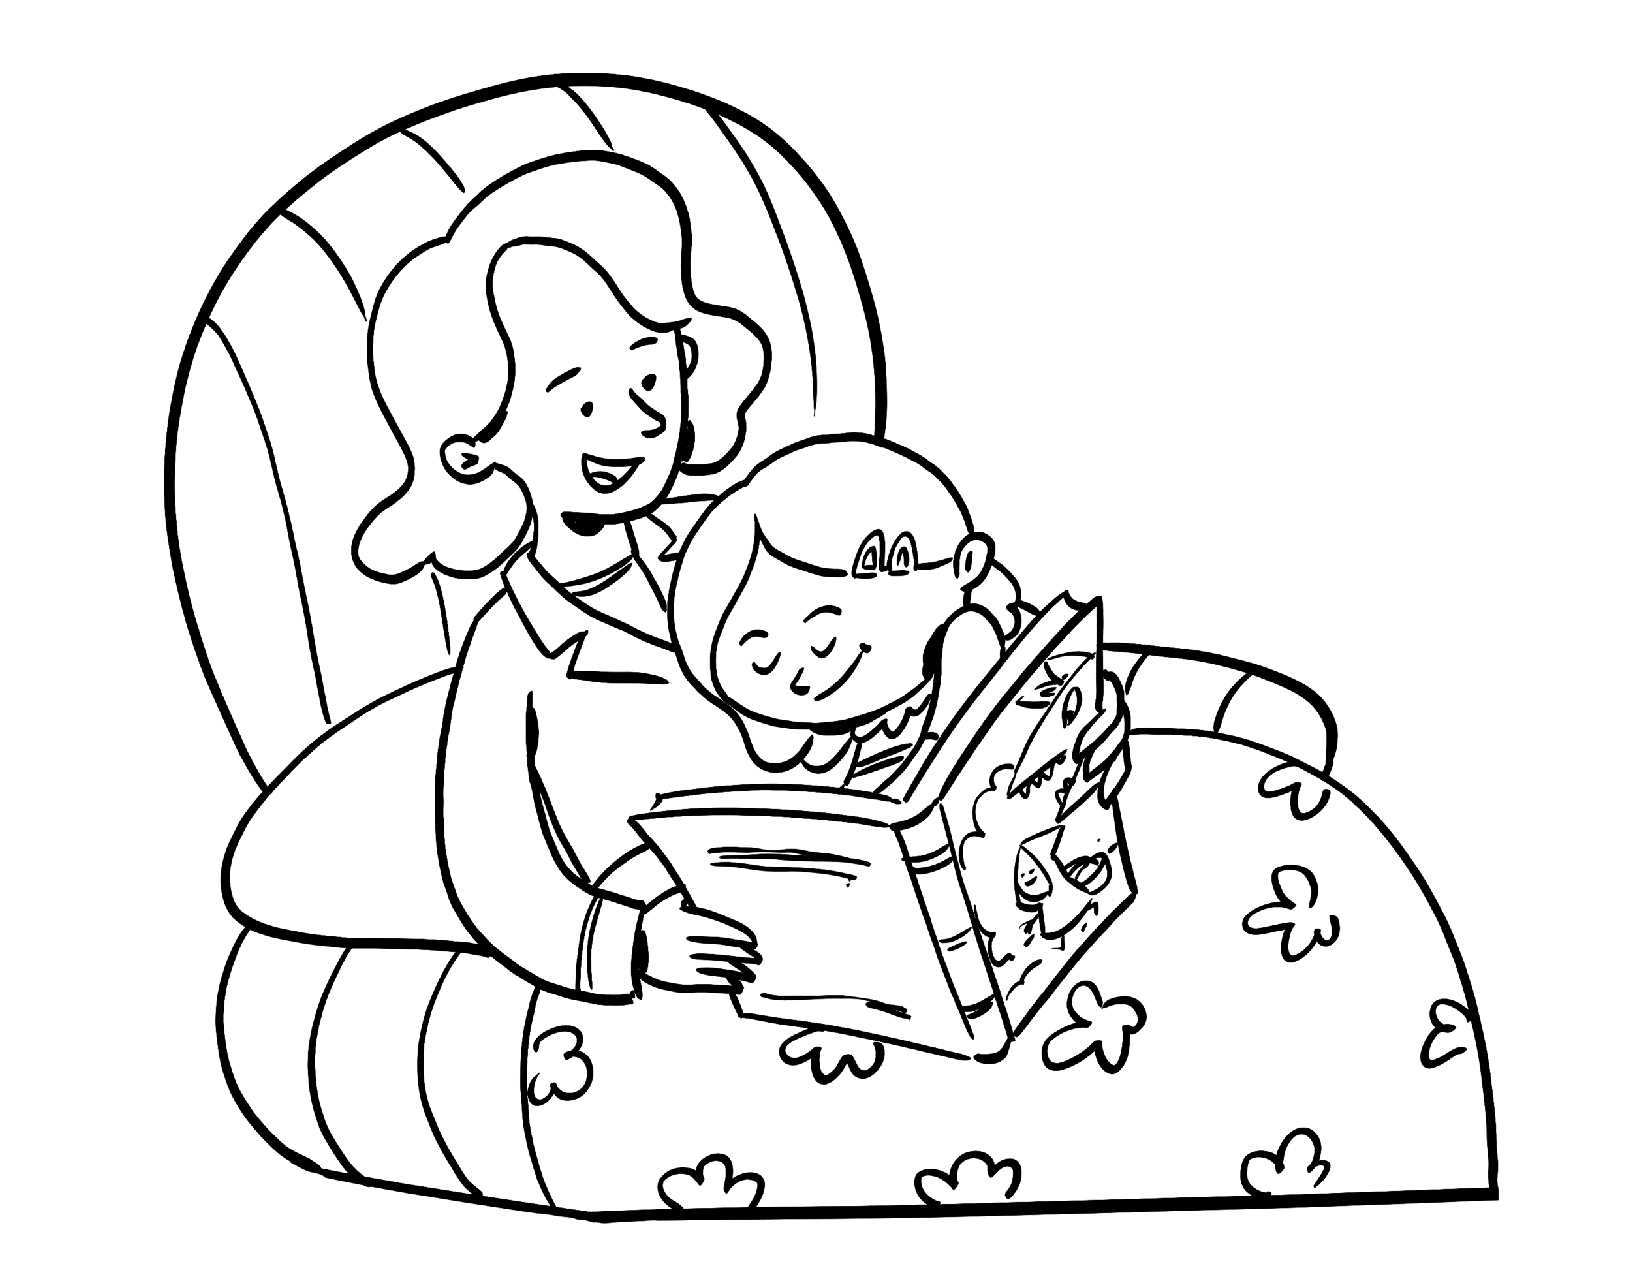 Coloring Page of a mom reading to her child